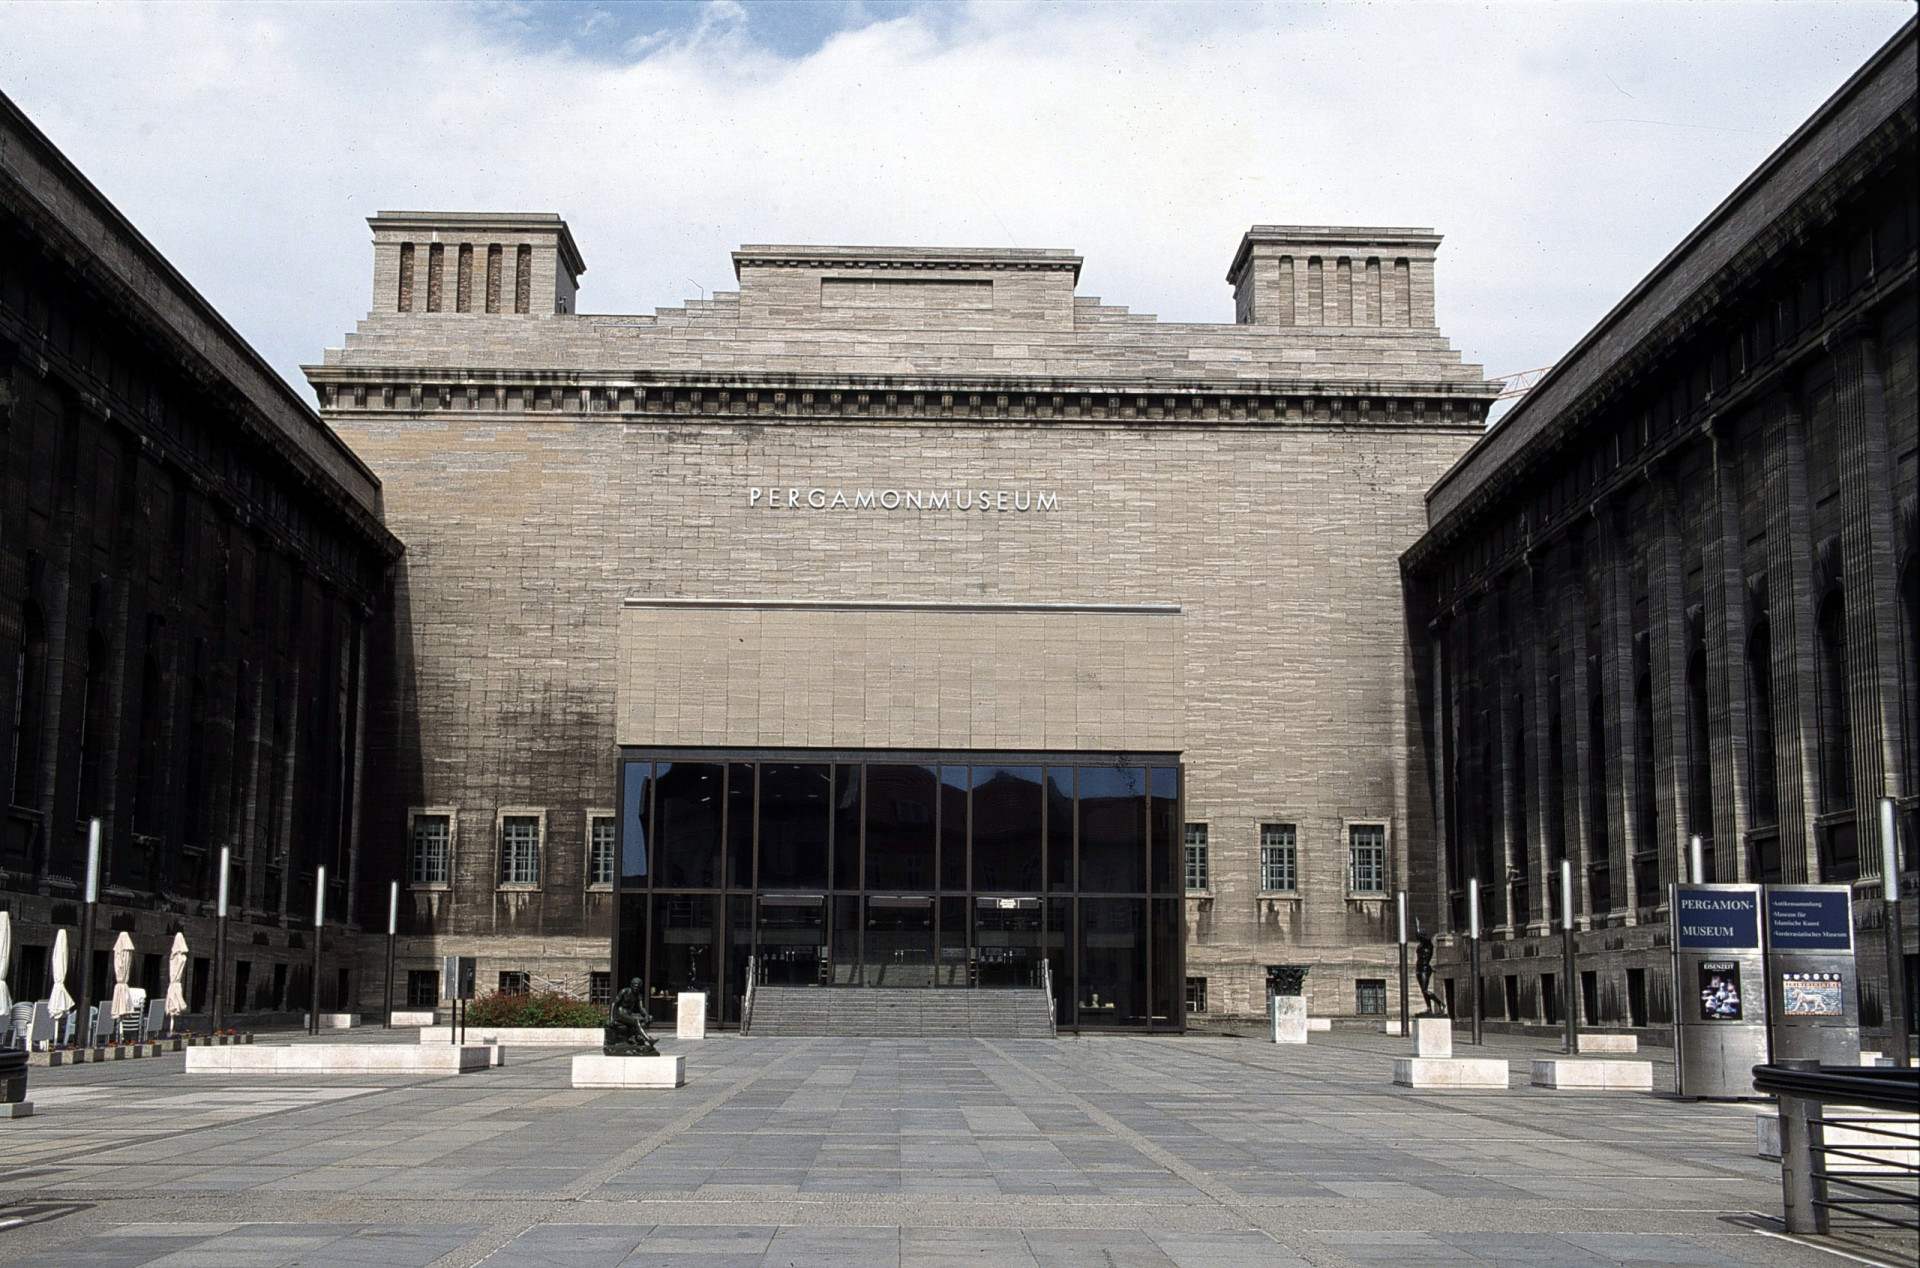 <p>This museum is closed for extensive upgrades until 2027, enhancing visitor experience while preserving its cultural treasures.</p><p><a href="https://www.msn.com/en-us/community/channel/vid-7xx8mnucu55yw63we9va2gwr7uihbxwc68fxqp25x6tg4ftibpra?cvid=94631541bc0f4f89bfd59158d696ad7e">Follow us and access great exclusive content every day</a></p>